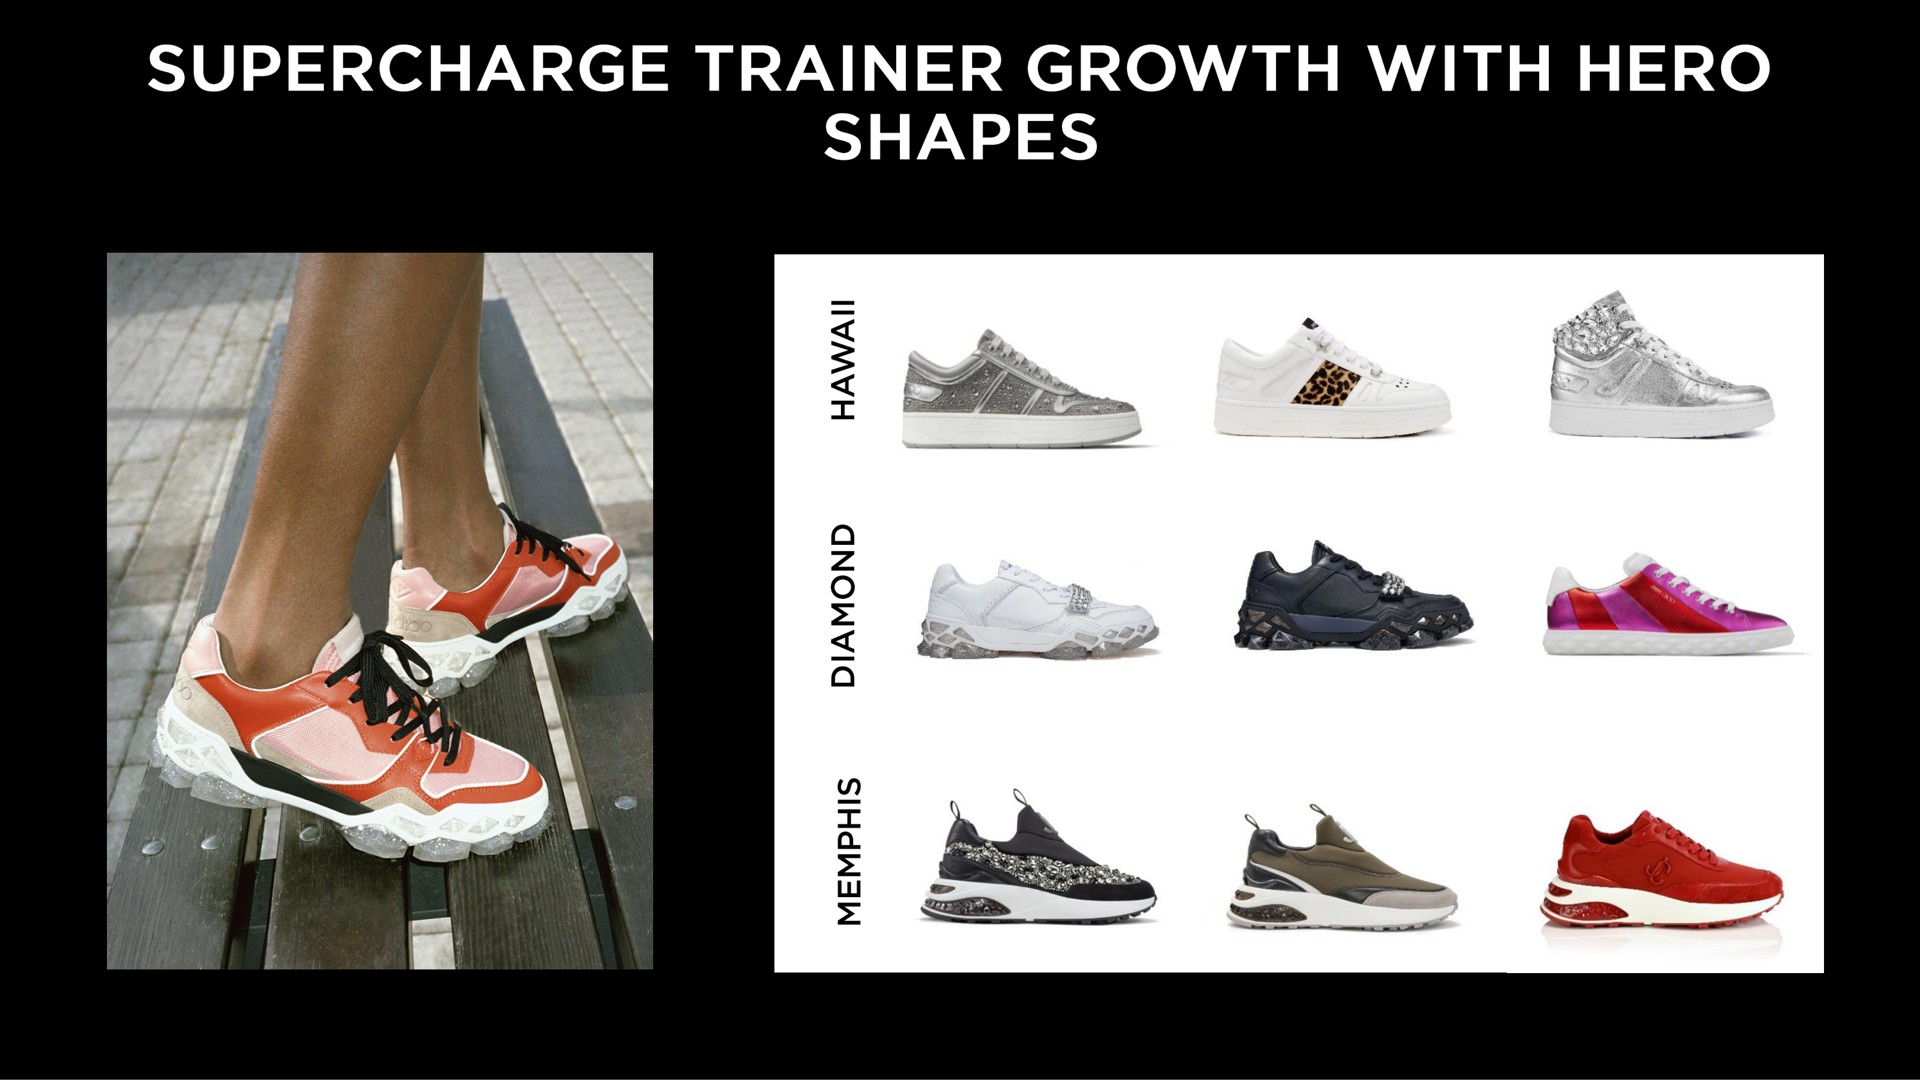 supercharge trainer growth with hero shapes | Capri Holdings